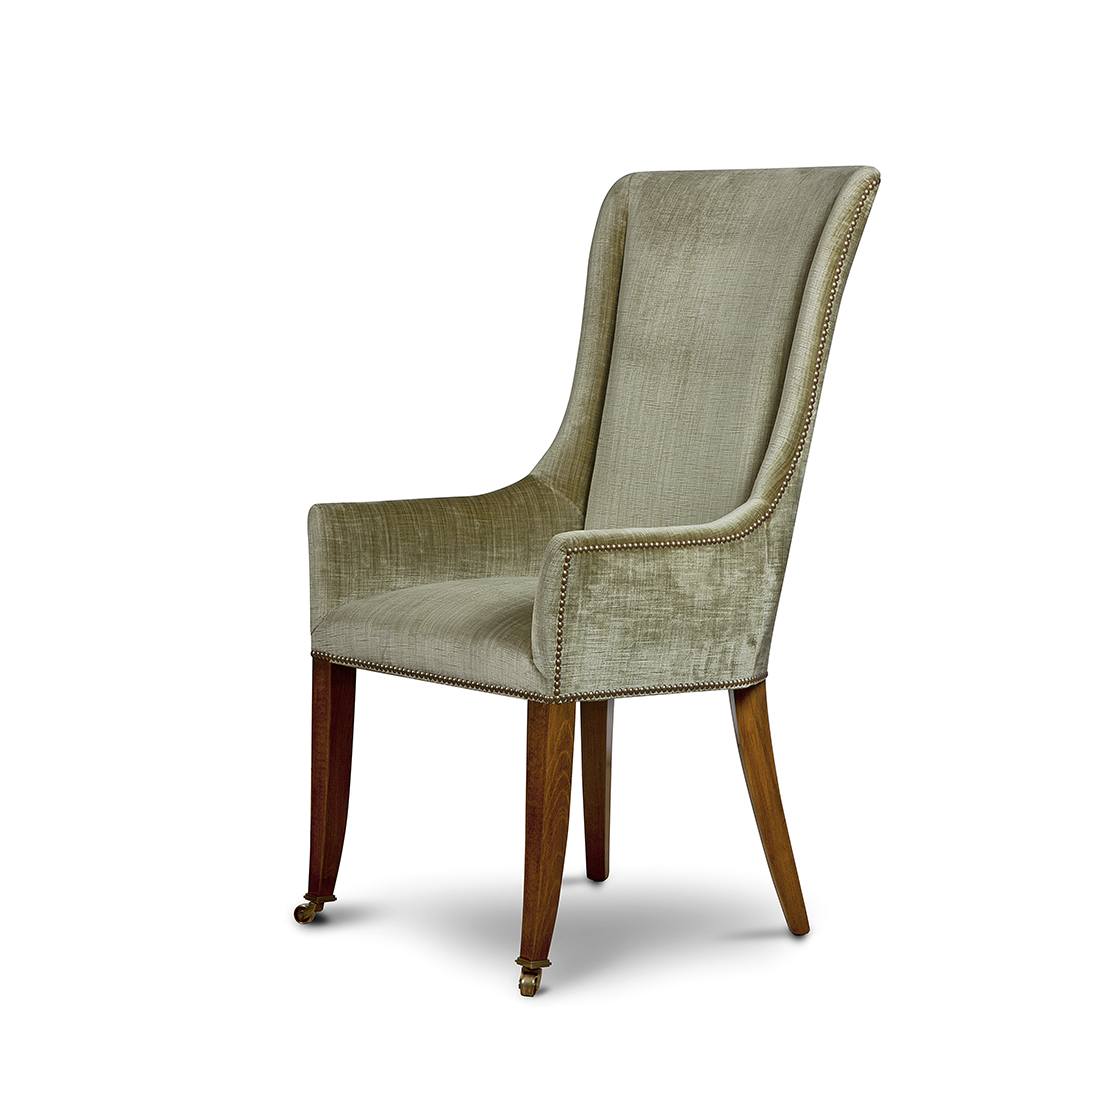 Kingsley carver dining chair with Zola Antique gold embroidery in Como silk velvet - Fern - Beaumont & Fletcher